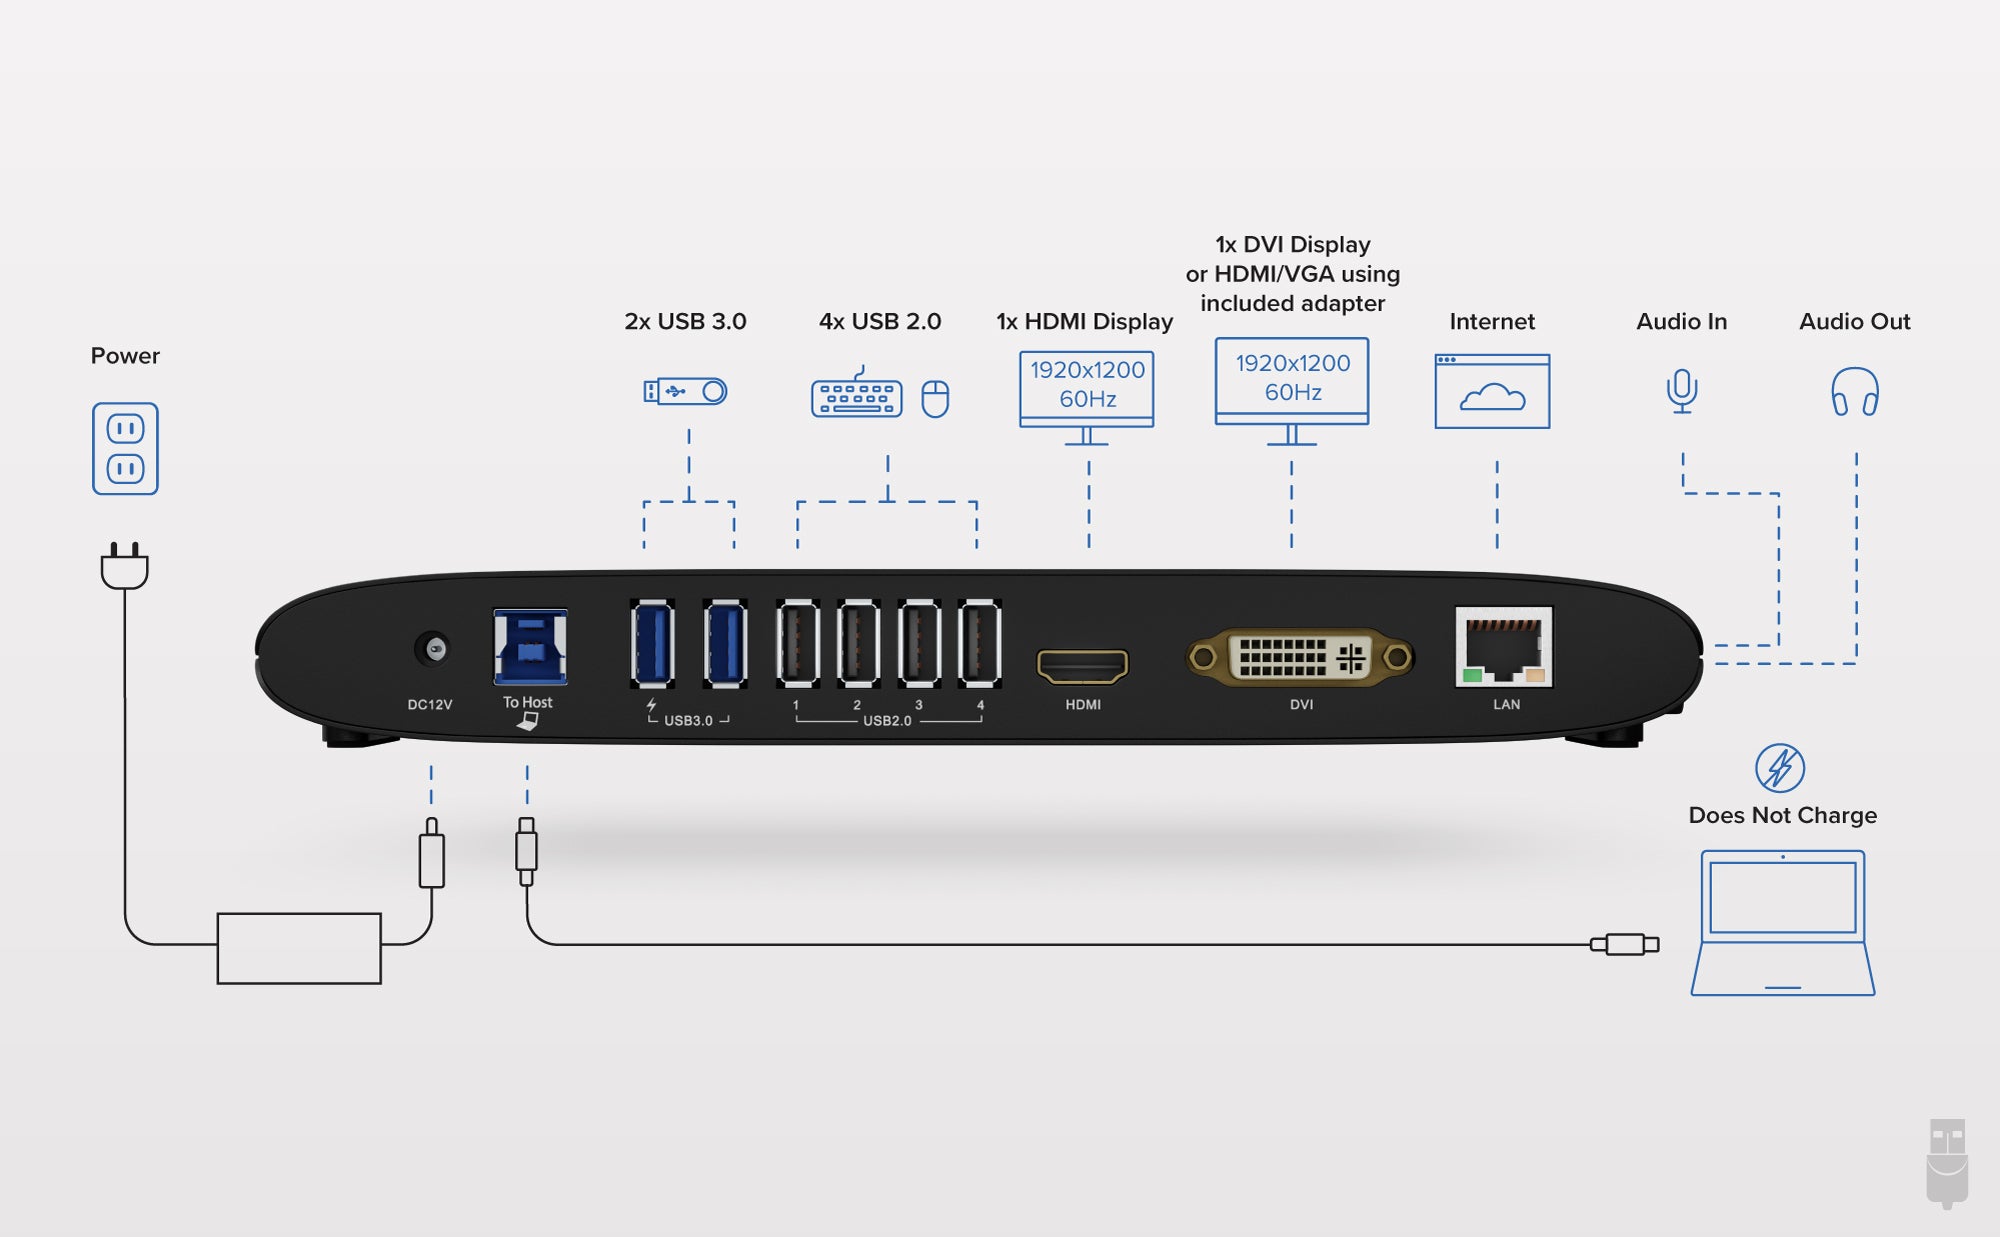 UD-3900H docking station diagram showing port configuration two USB 3.0 four USB 2.0 one HDMI one DVI or HDMI/VGA using adapter one Internet Audio in and Audio out ports and power port 